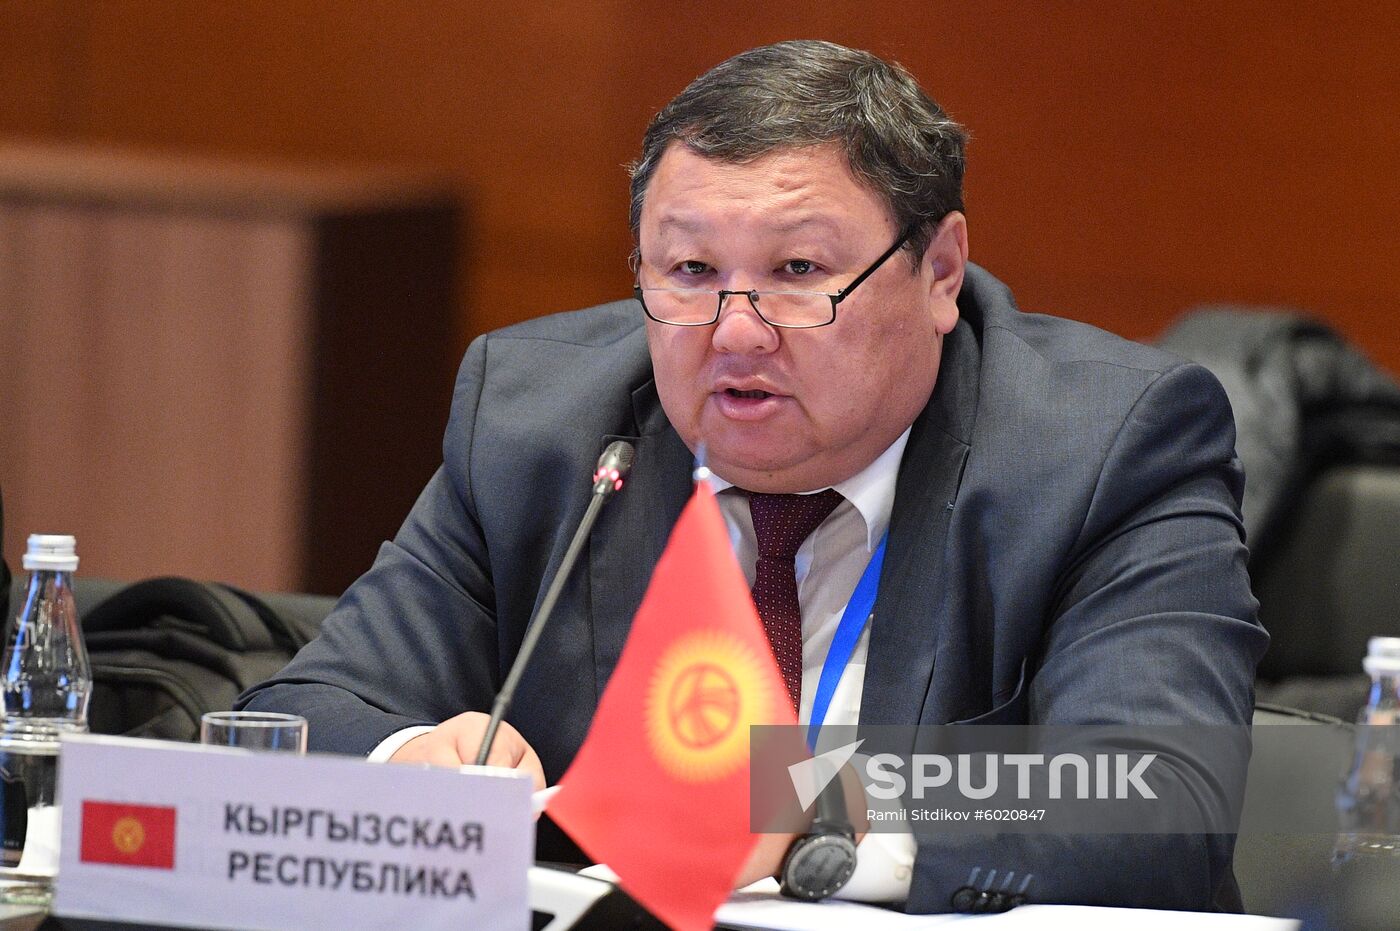 Meeting of environmental protection experts of the SCO member states. Day one